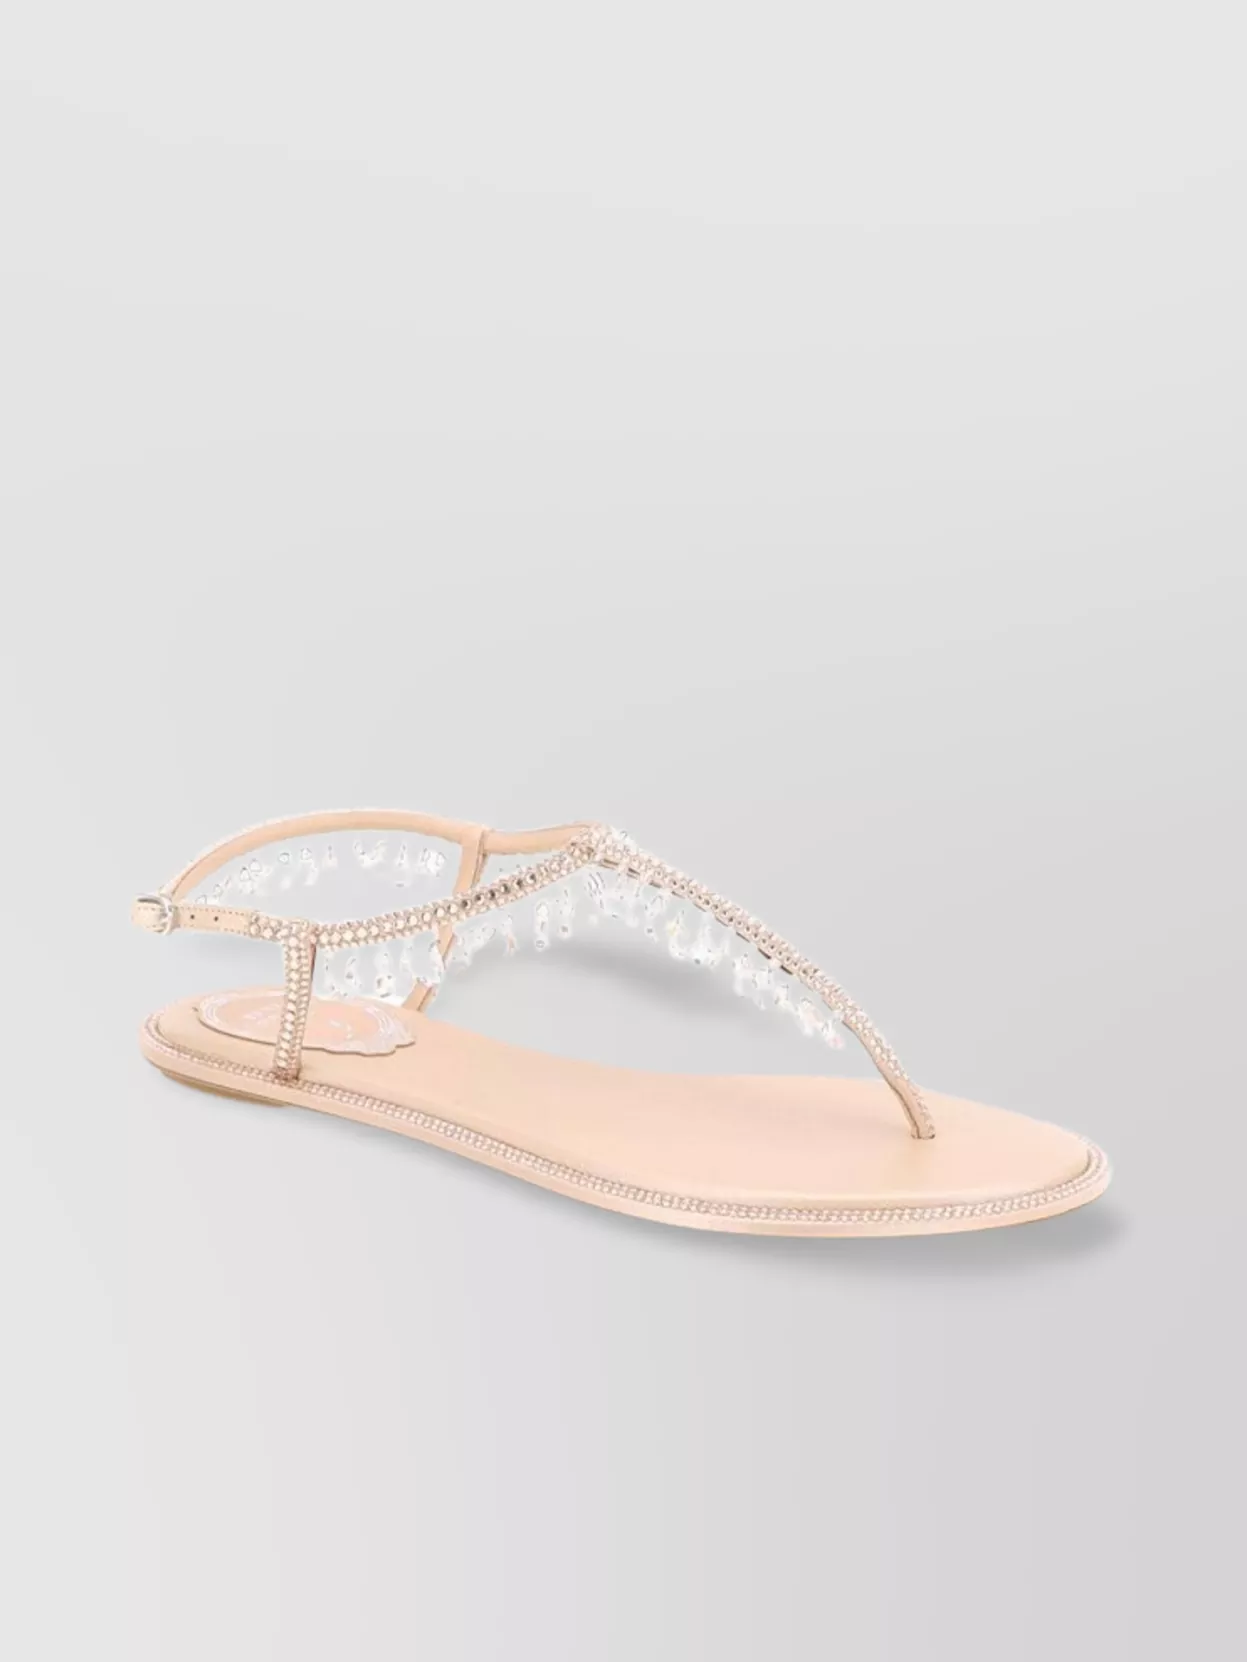 René Caovilla Embellished Thong Toe Sandals In Pink